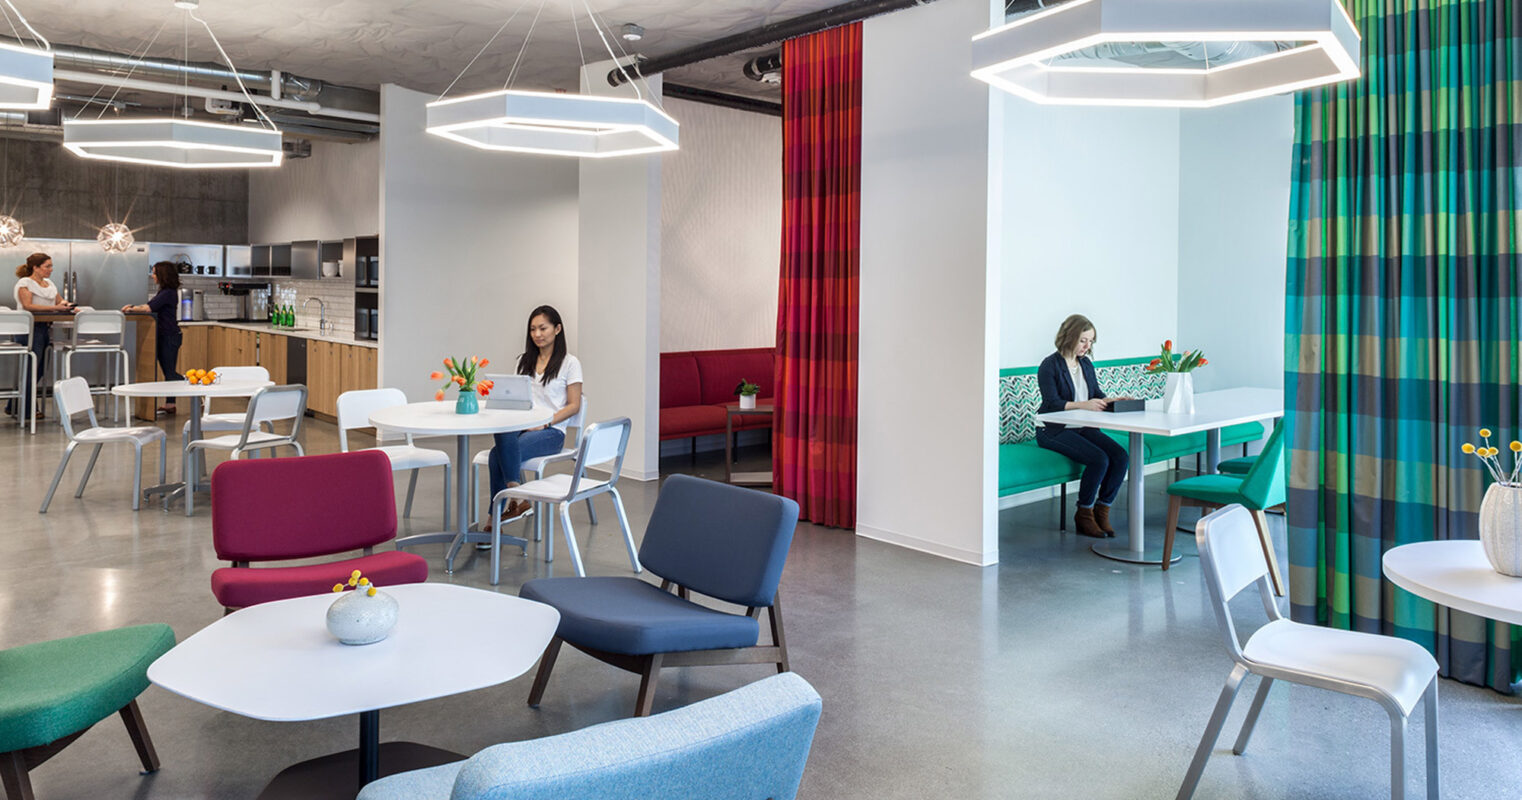 Modern office break area with varied seating options including booths and chairs, accentuated by vibrant color contrasts, geometric light fixtures, and open-plan greenery for a contemporary, inviting space.